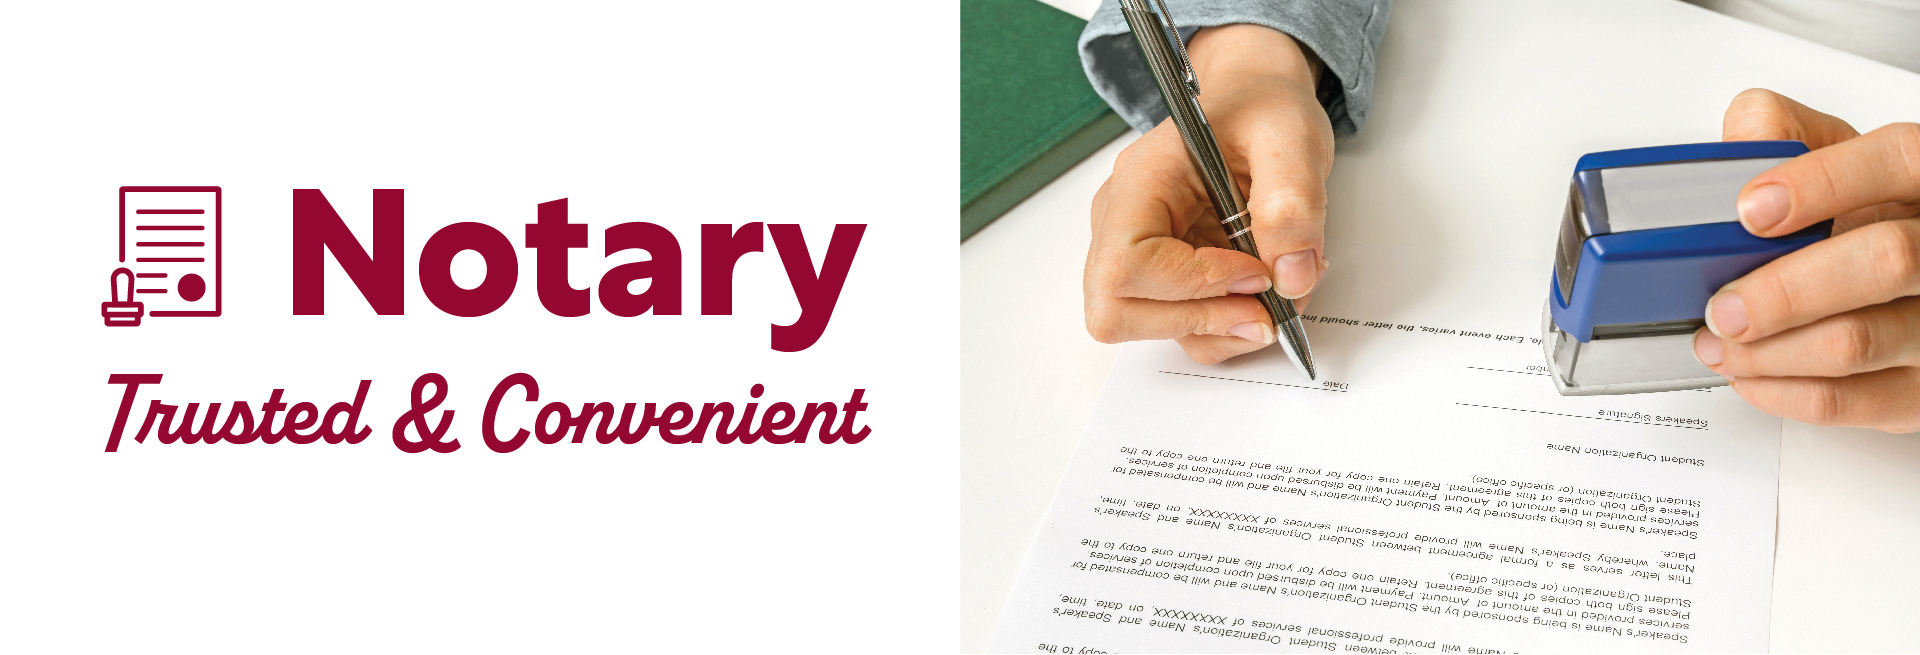 Notary - Trusted and Convenient 